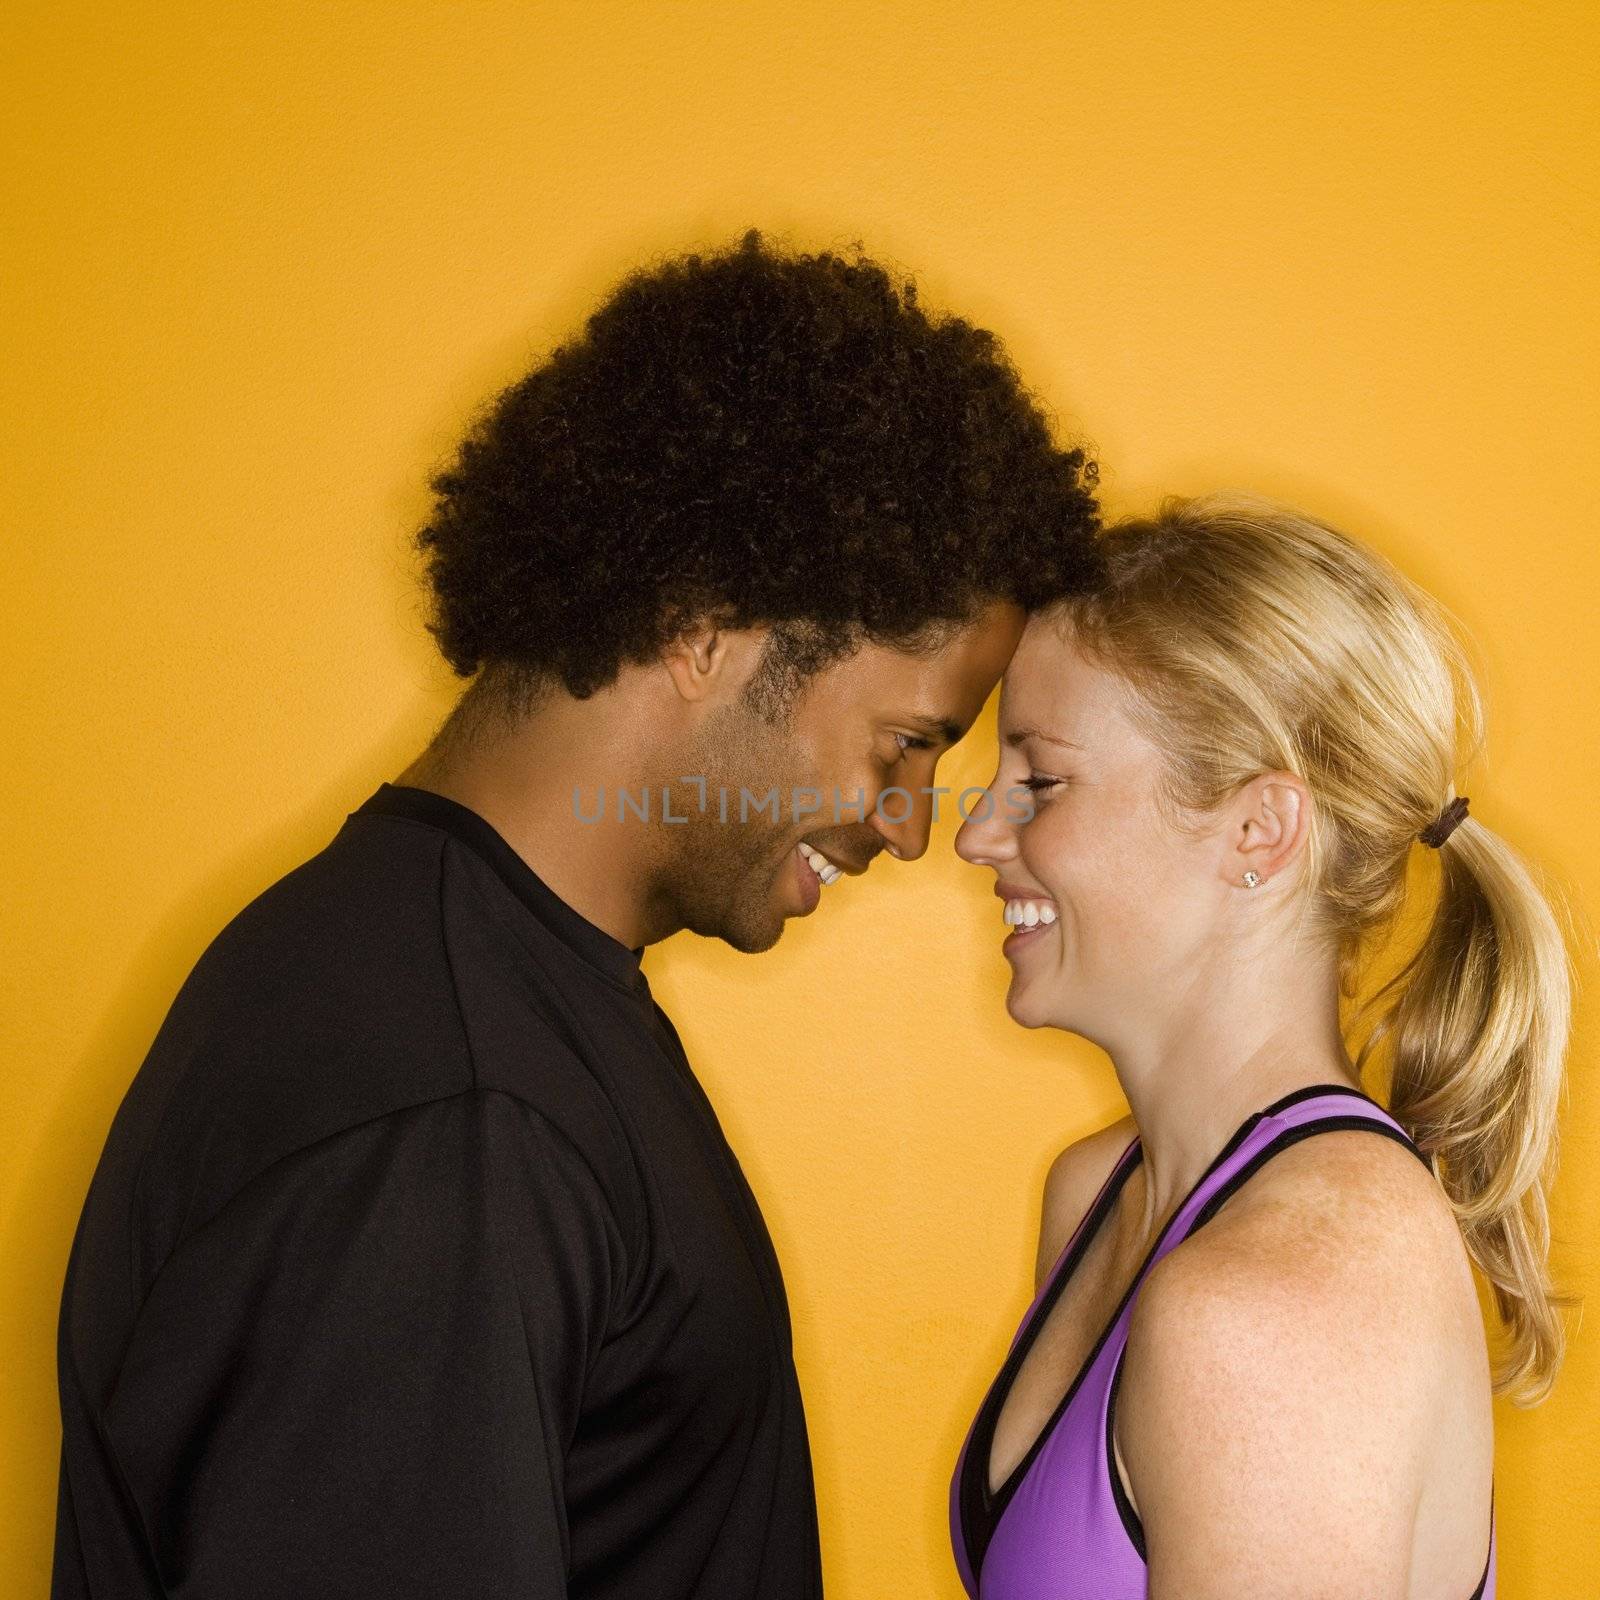 Caucasian woman with head against African-American male's head.